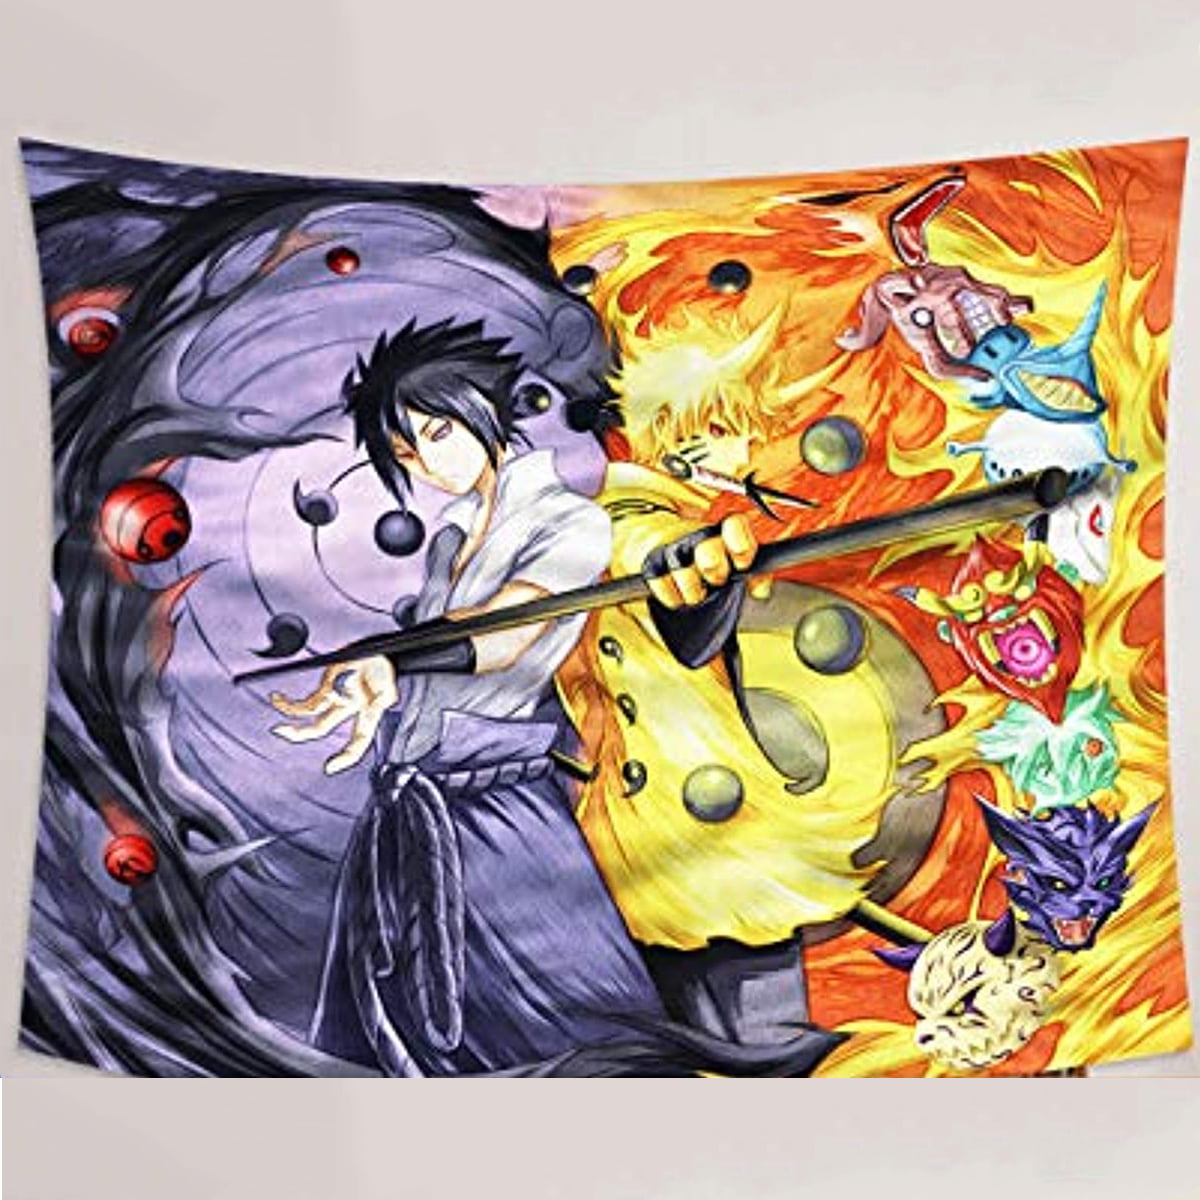 Sosolong Japanese Anime Tapestry Naluto Hanging Tapestry for Room Decor Boys Bedroom Wall Decor Naluto 3, 79in*59in 